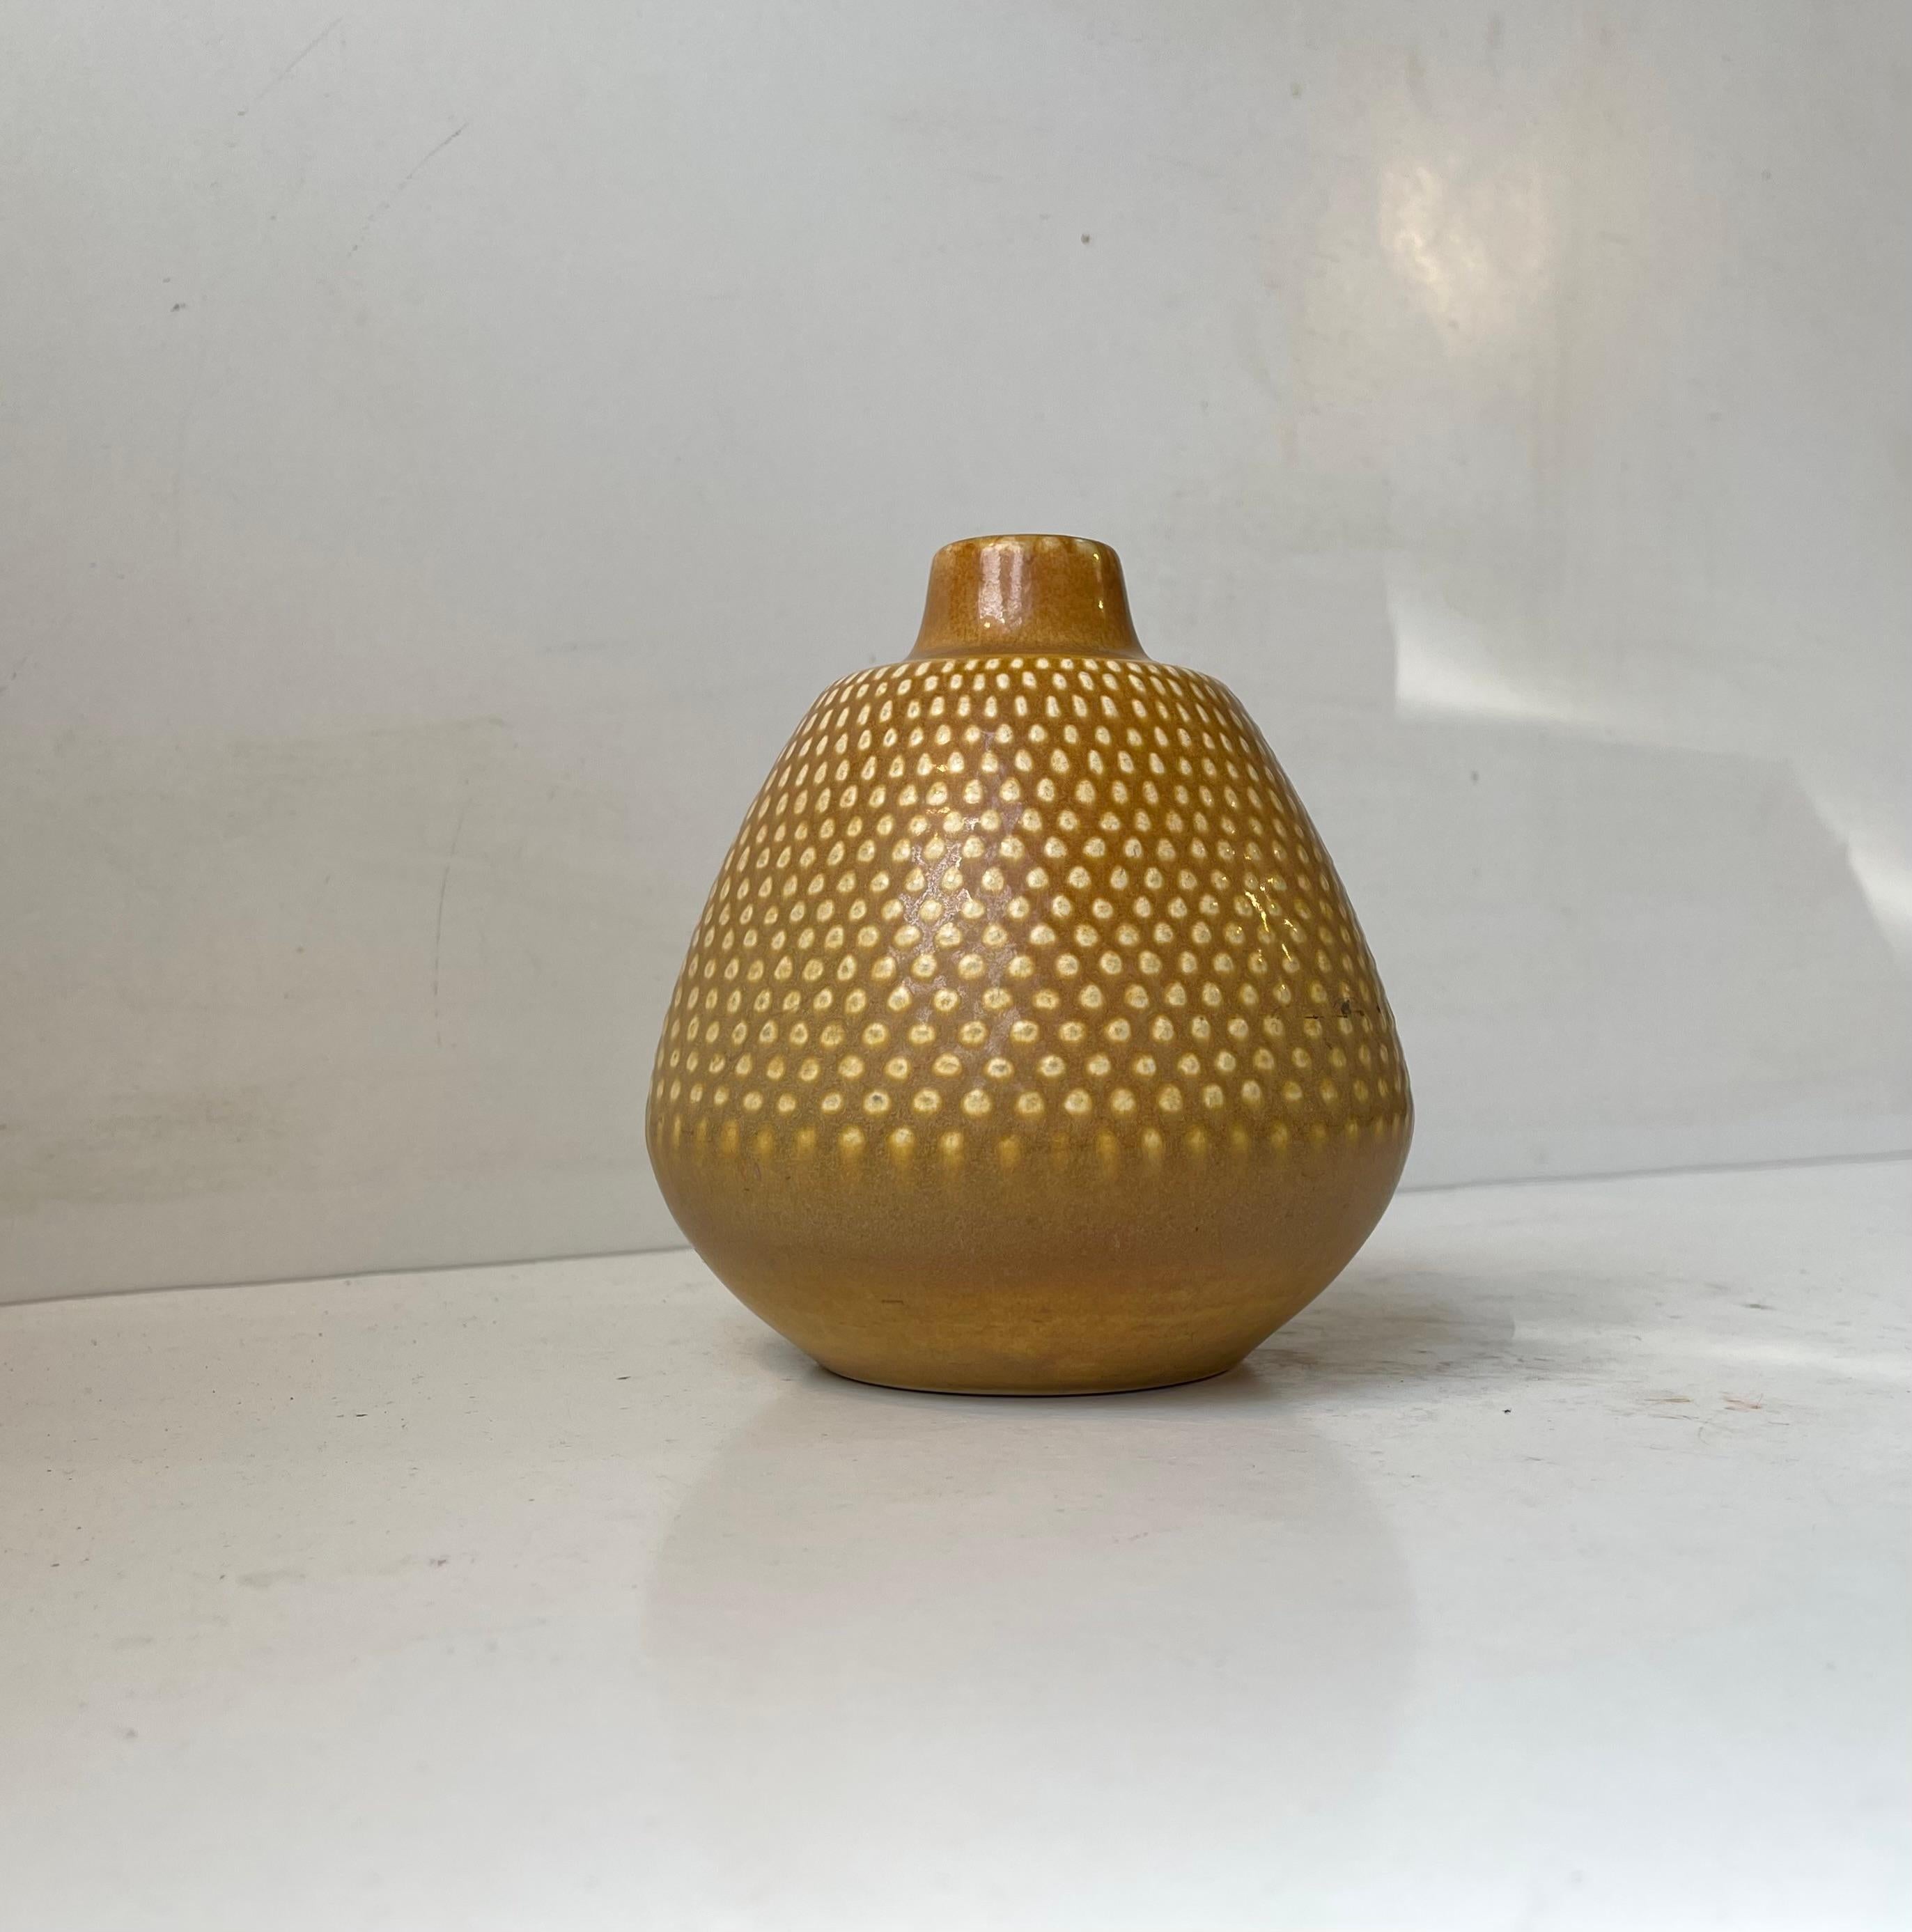 Exceptional unidentified Swedish ceramic vase with pertruding dots and delicate ocra yellow haresfur glaze. Very similar to pieces by Gunnar Nylund, Carl H. Stahlhane, Nils Thorsson and Saxbo. Very indistinguishable marked. Measurements: H: 14.5 cm,